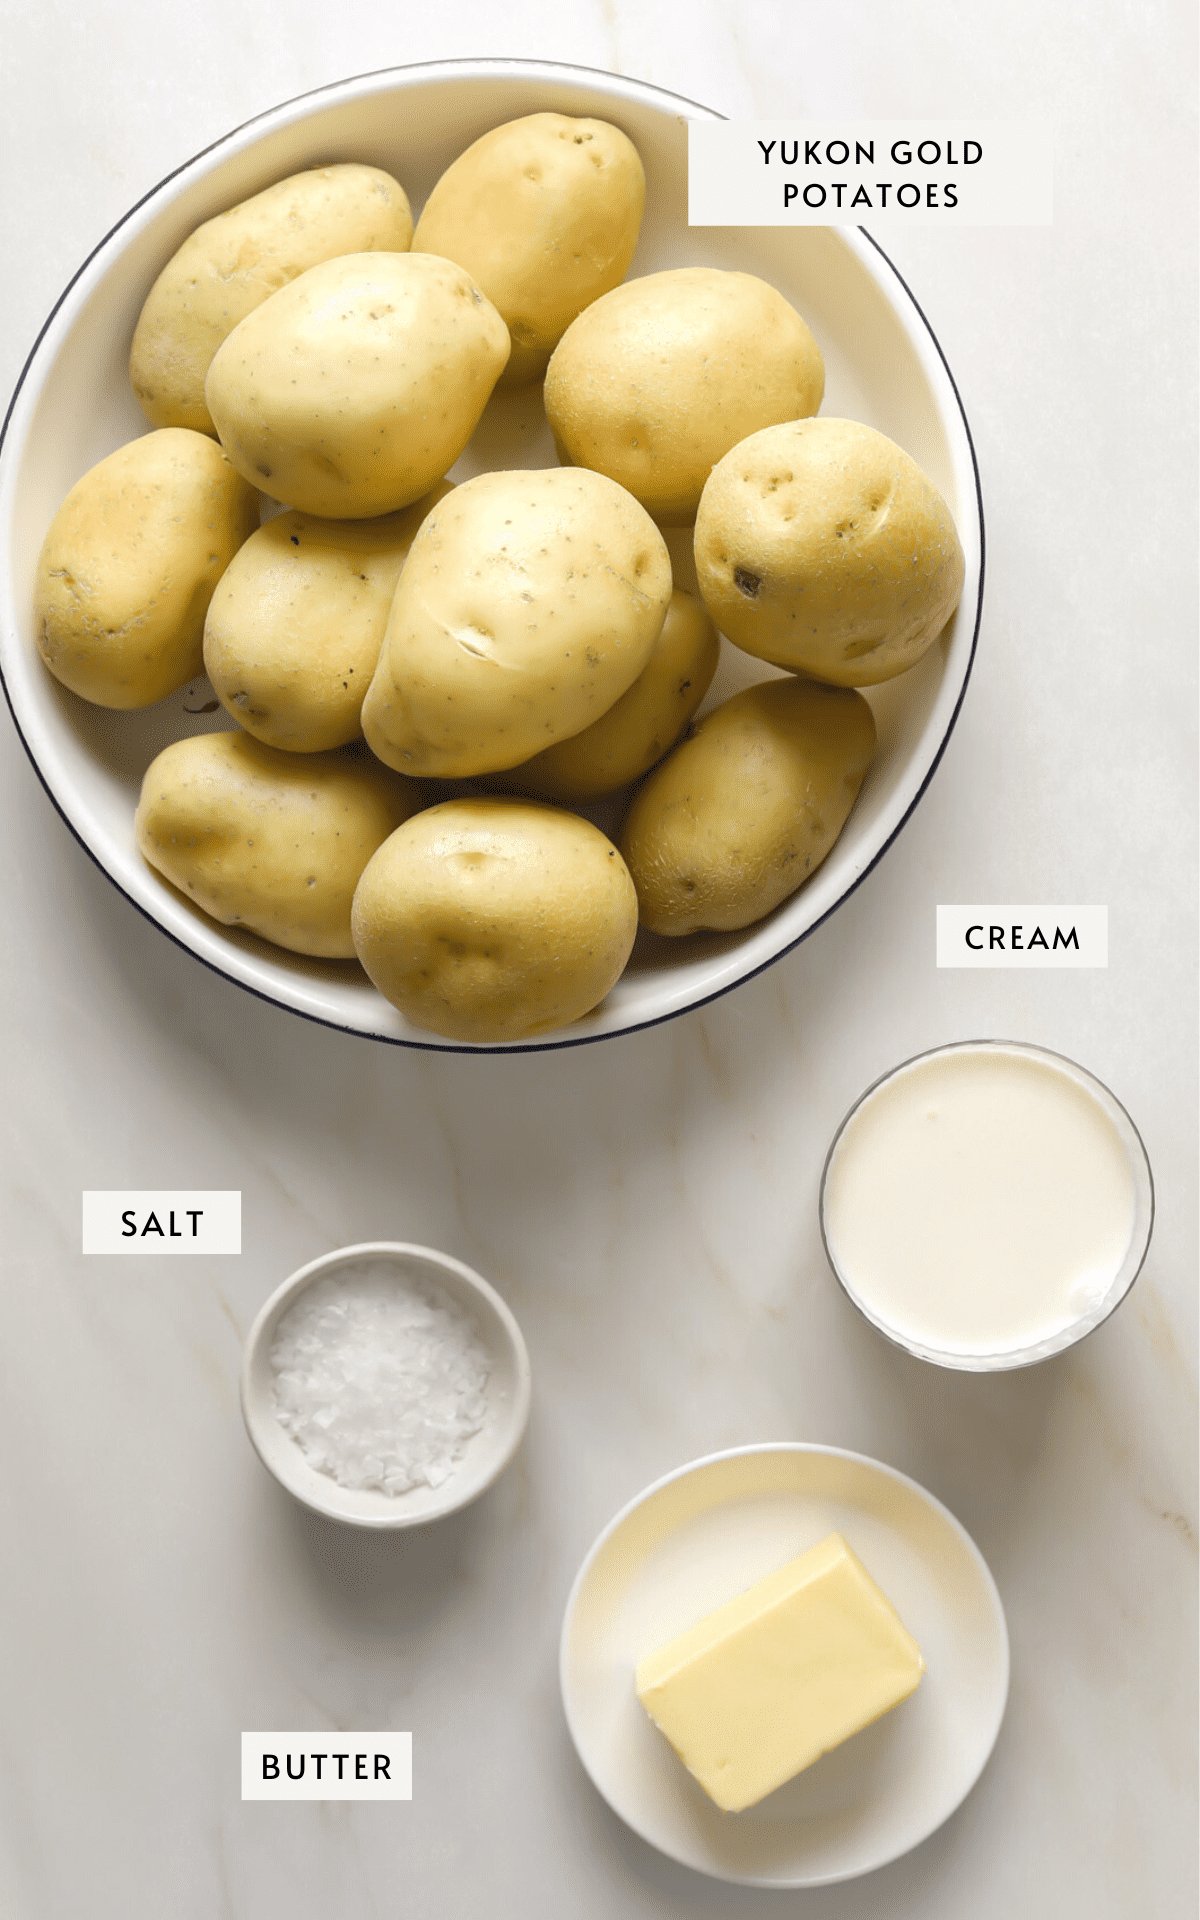 A bowl of Yukon gold potatoes, small dishes of cream, butter and salt.